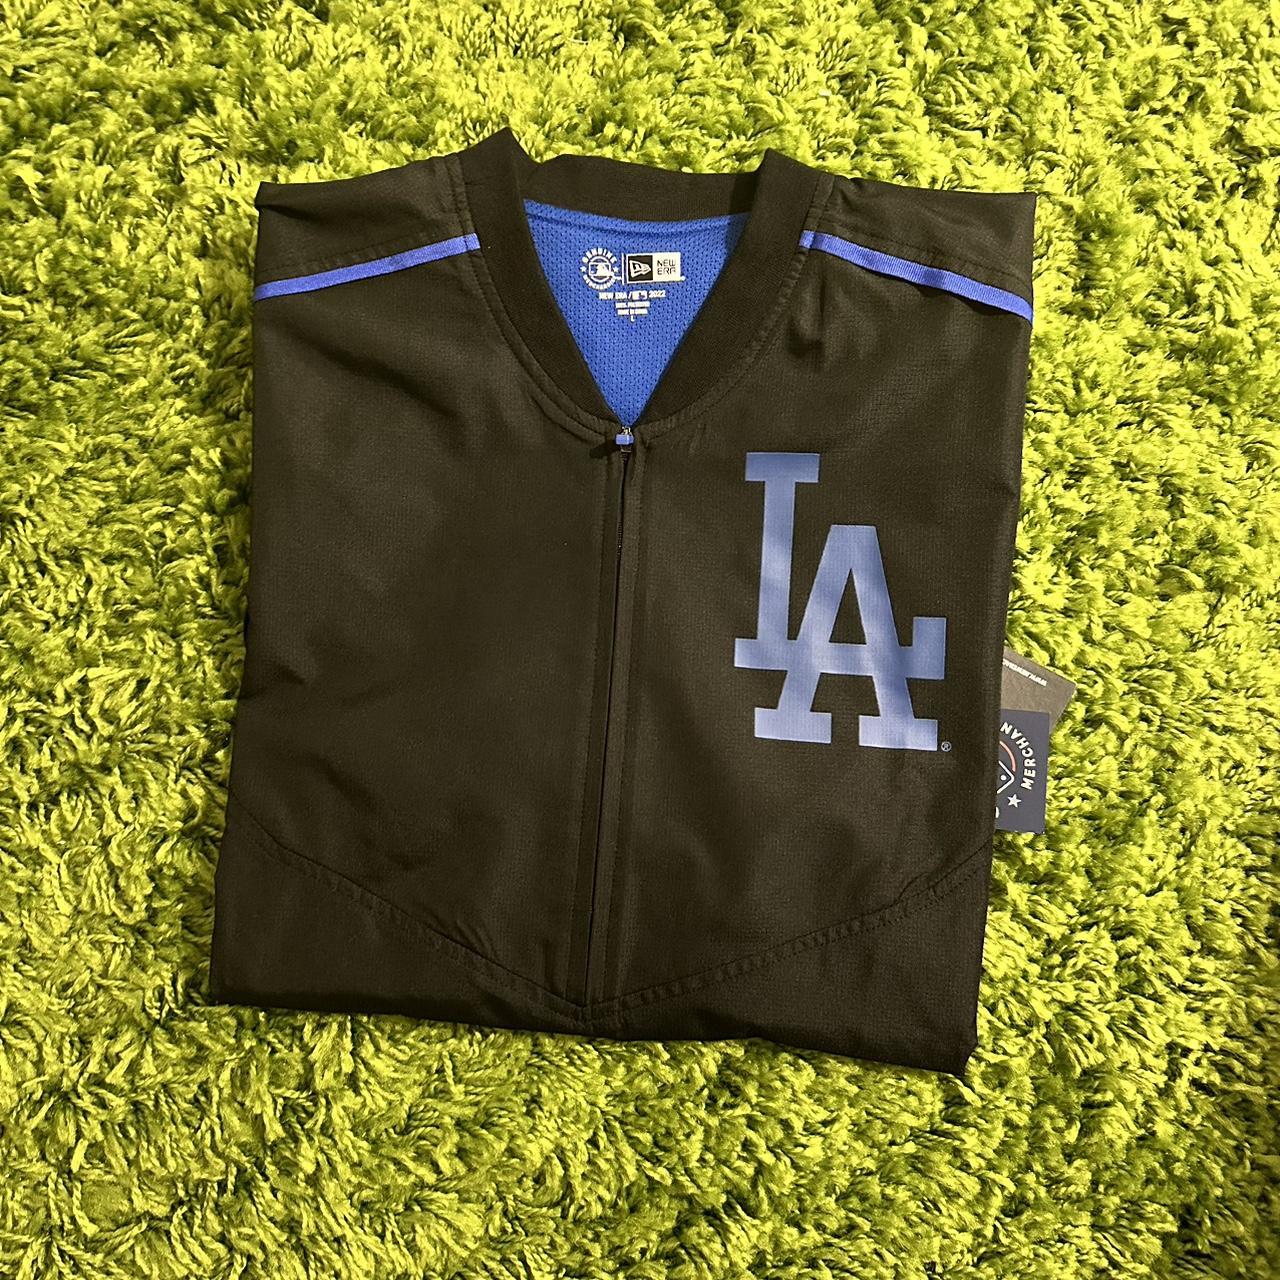 LA dodgers hyper cool shirt from the authentic - Depop